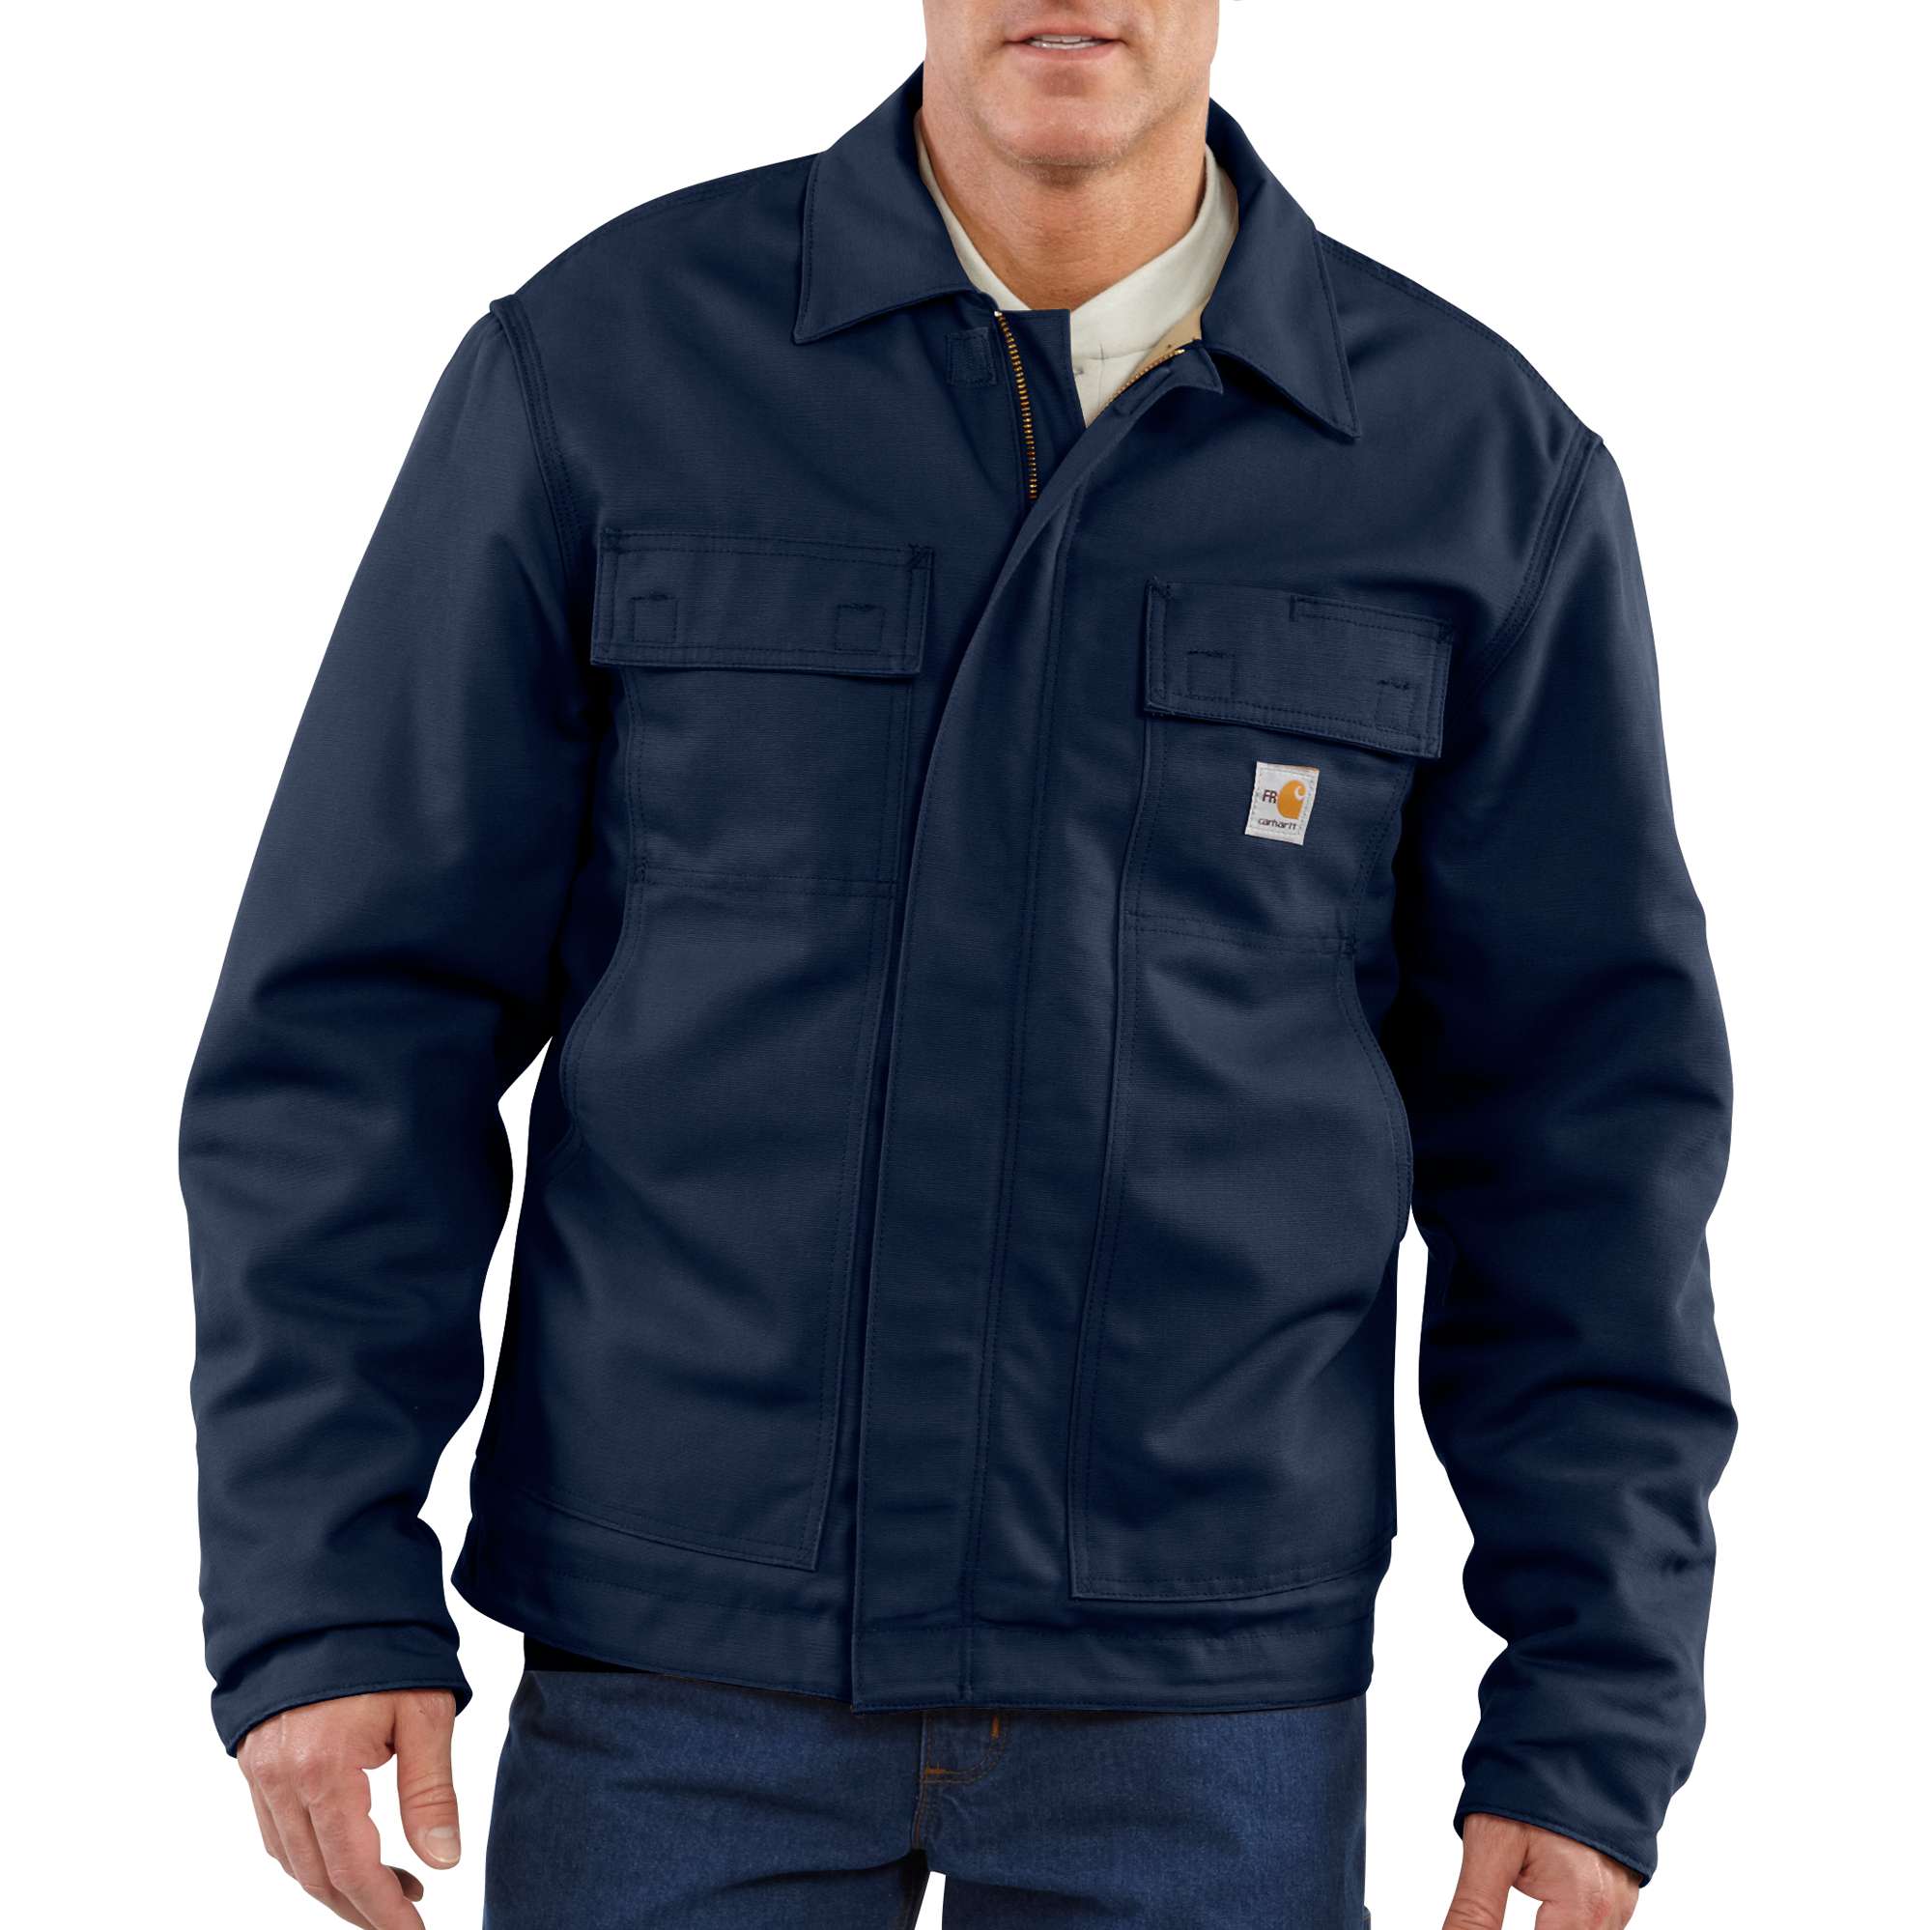 Carhartt Flame-resistant Lanyard Access Jacket/quilt-lined